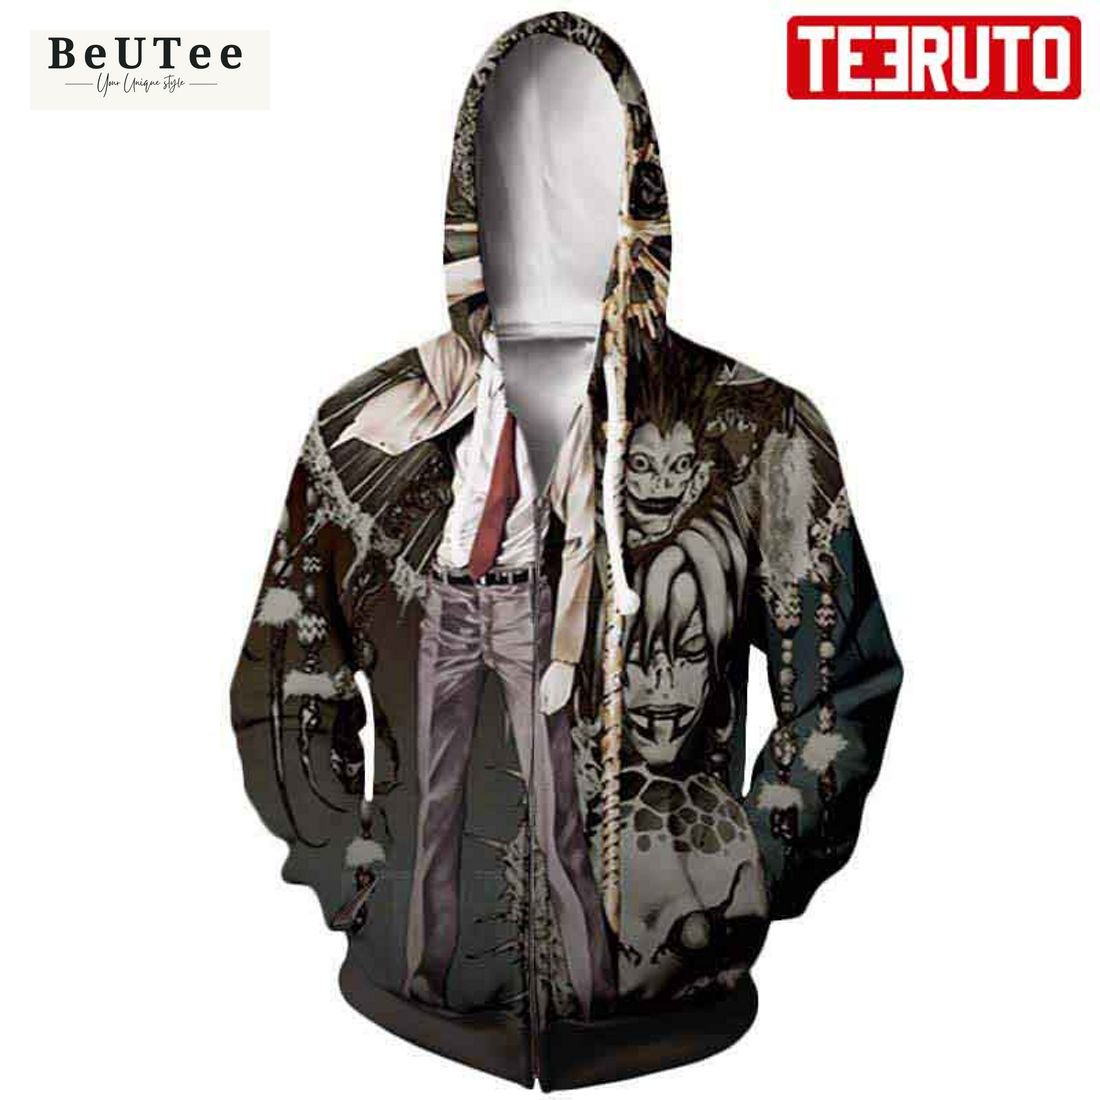 light yagami with ryuk demons death note anime hd 3d aop hoodie 1 XKjzM